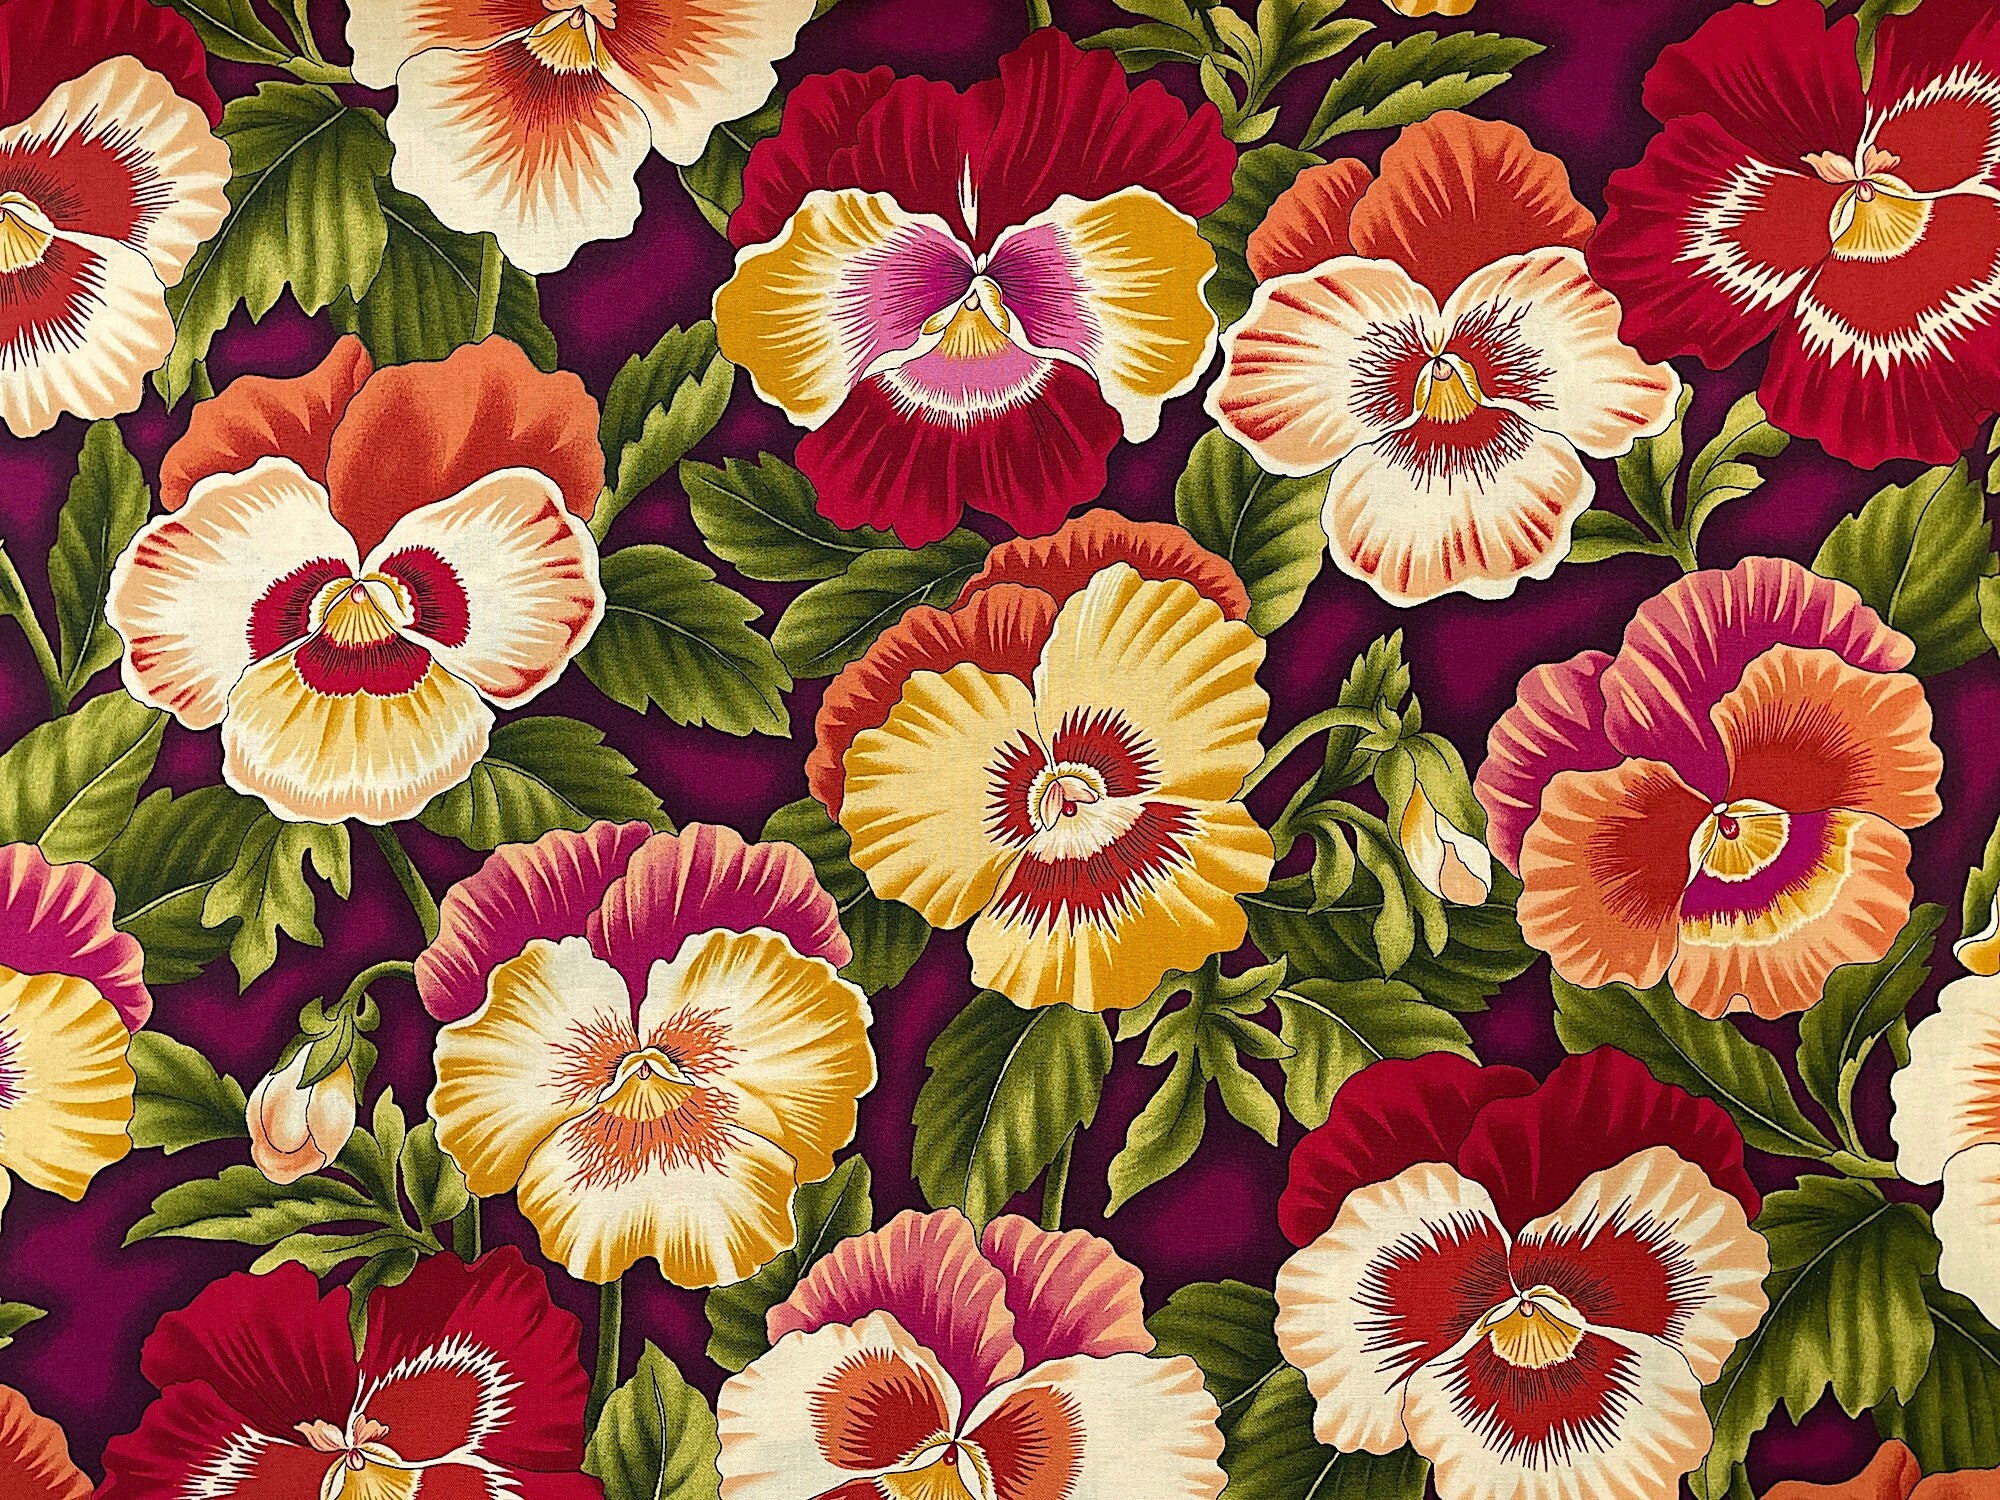 Cotton fabric covered with yellow, red, orange and white pansies and green leaves.